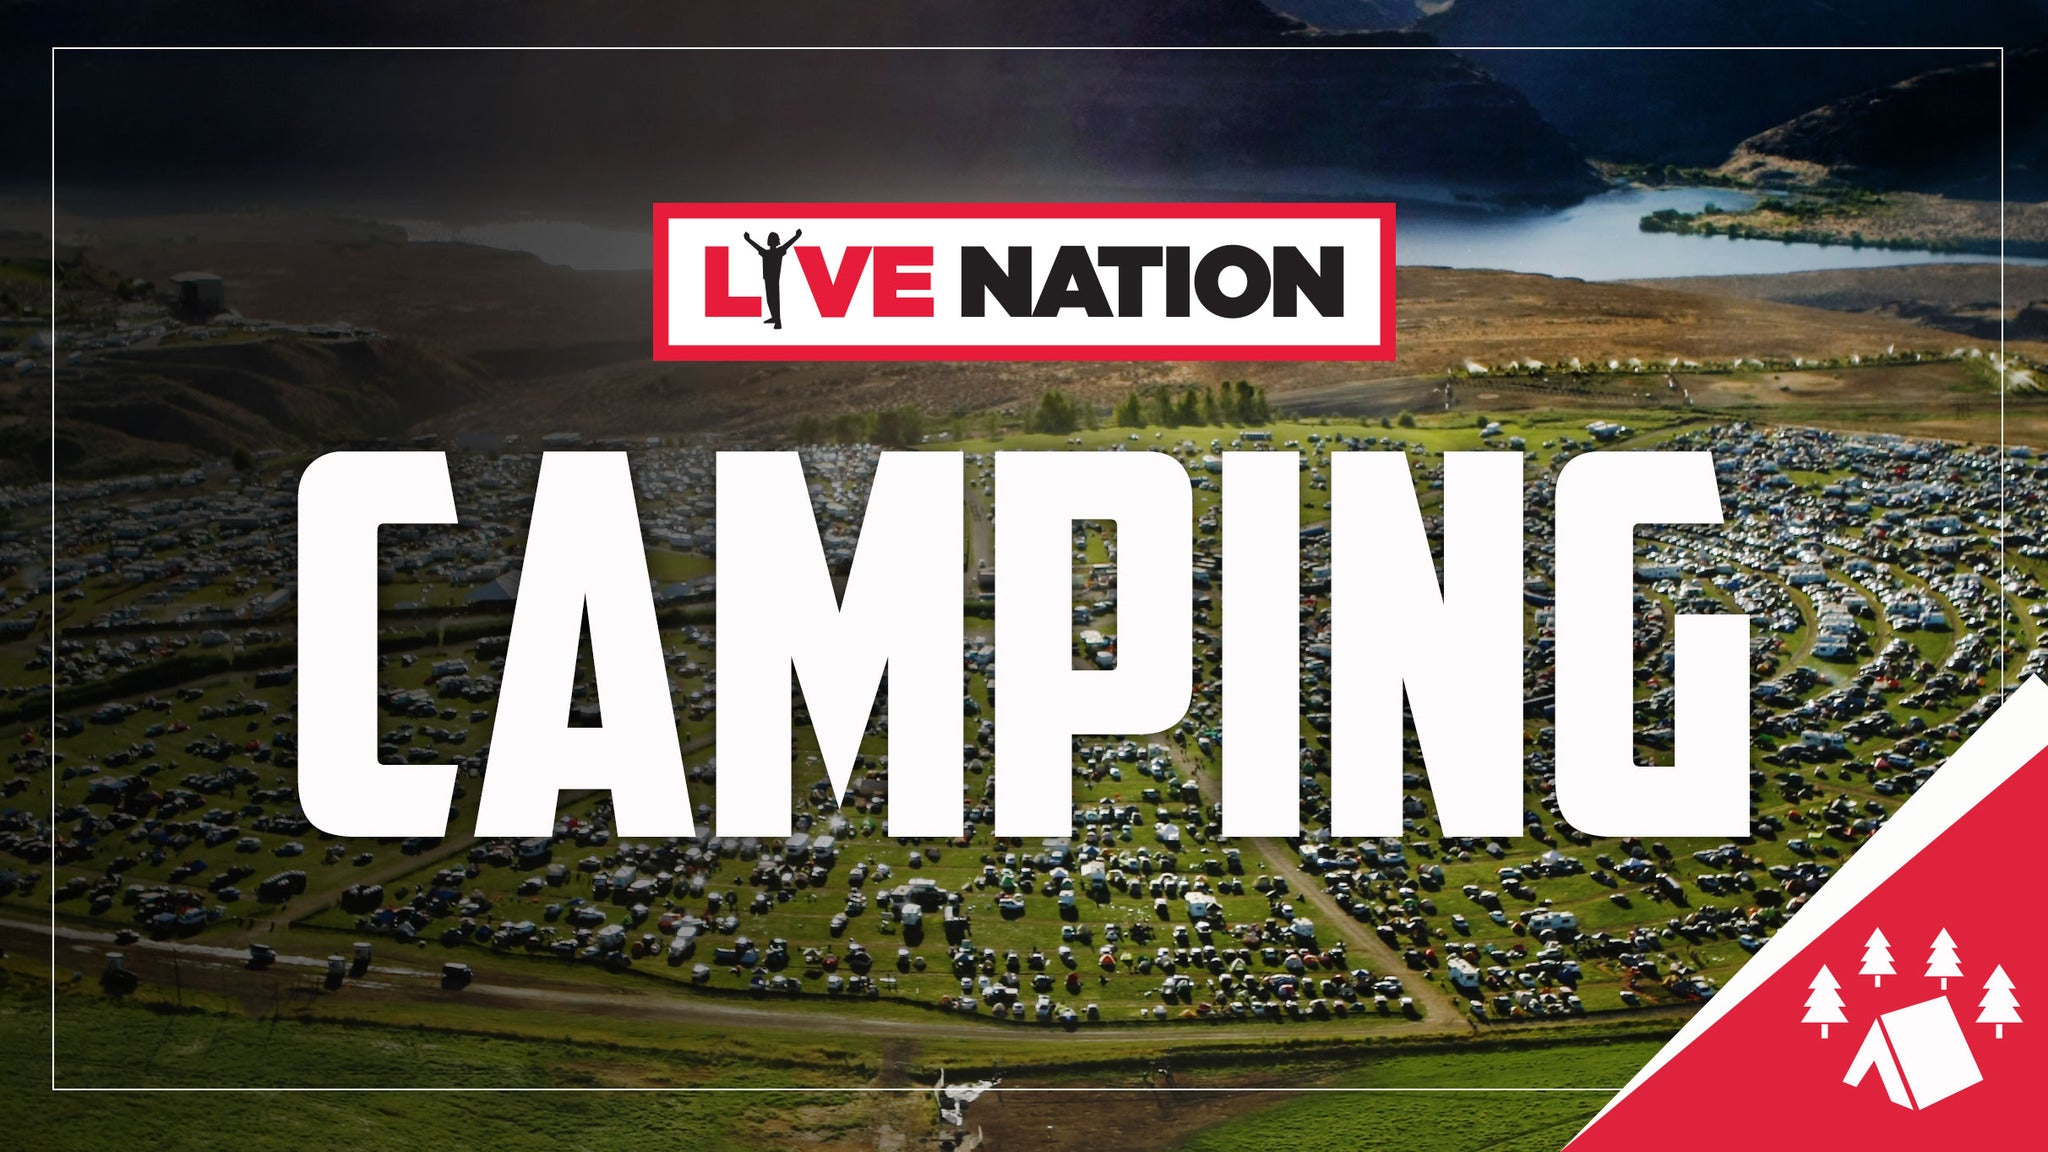 Gorge Amphitheatre Camping: Blink-182 pre-sale code for advance tickets in George